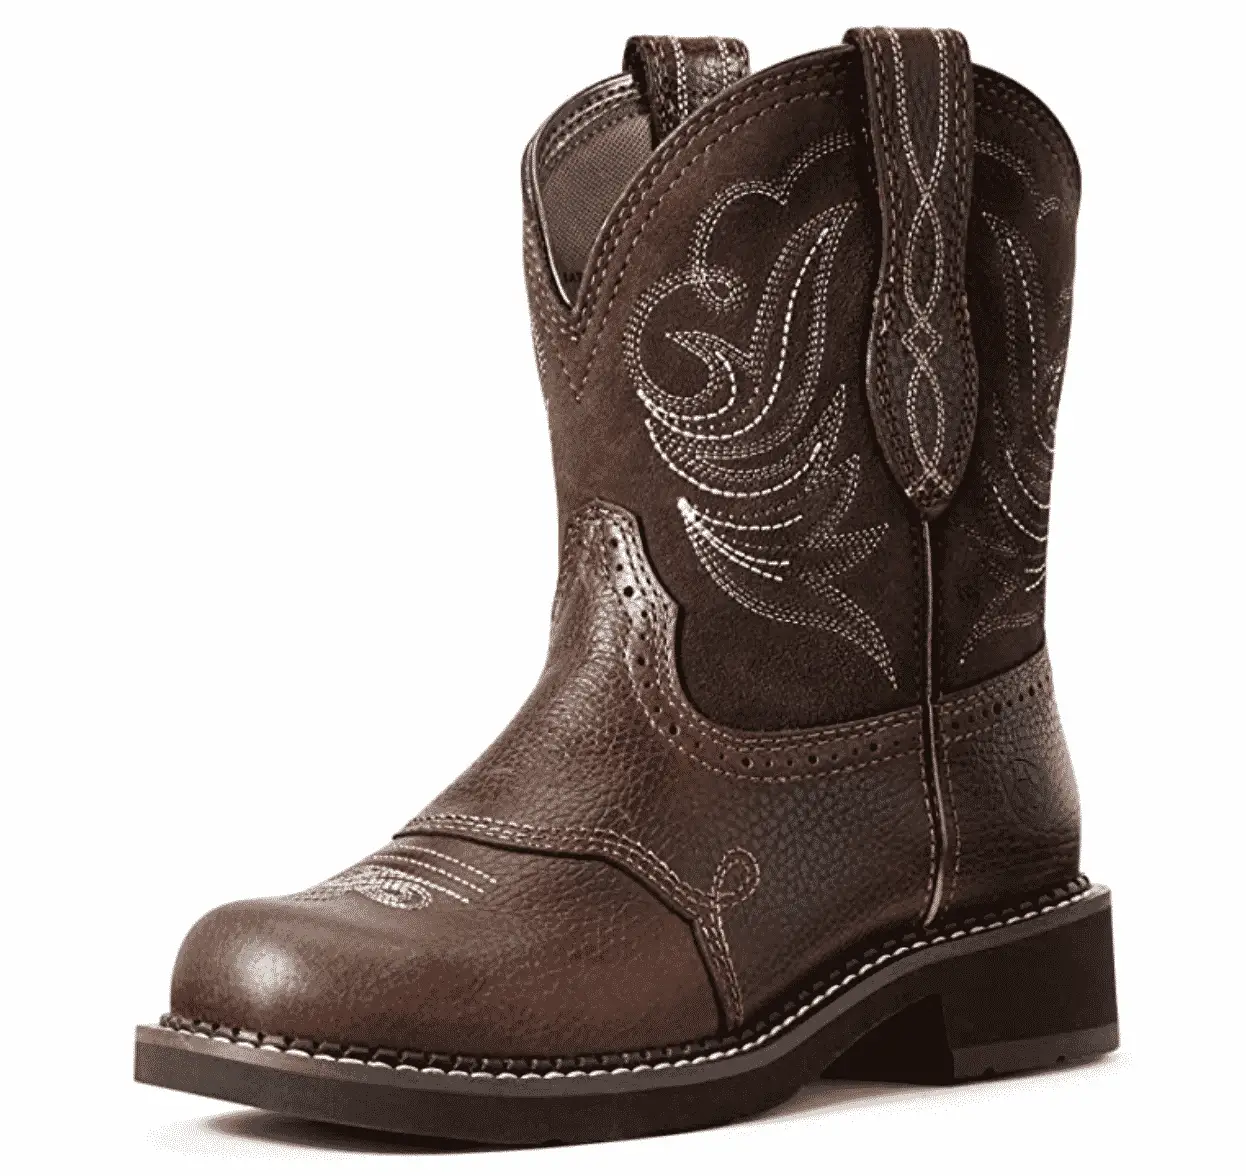 Best Ariat Cowboy Boots for Women – Equestrian Boots and Bridles